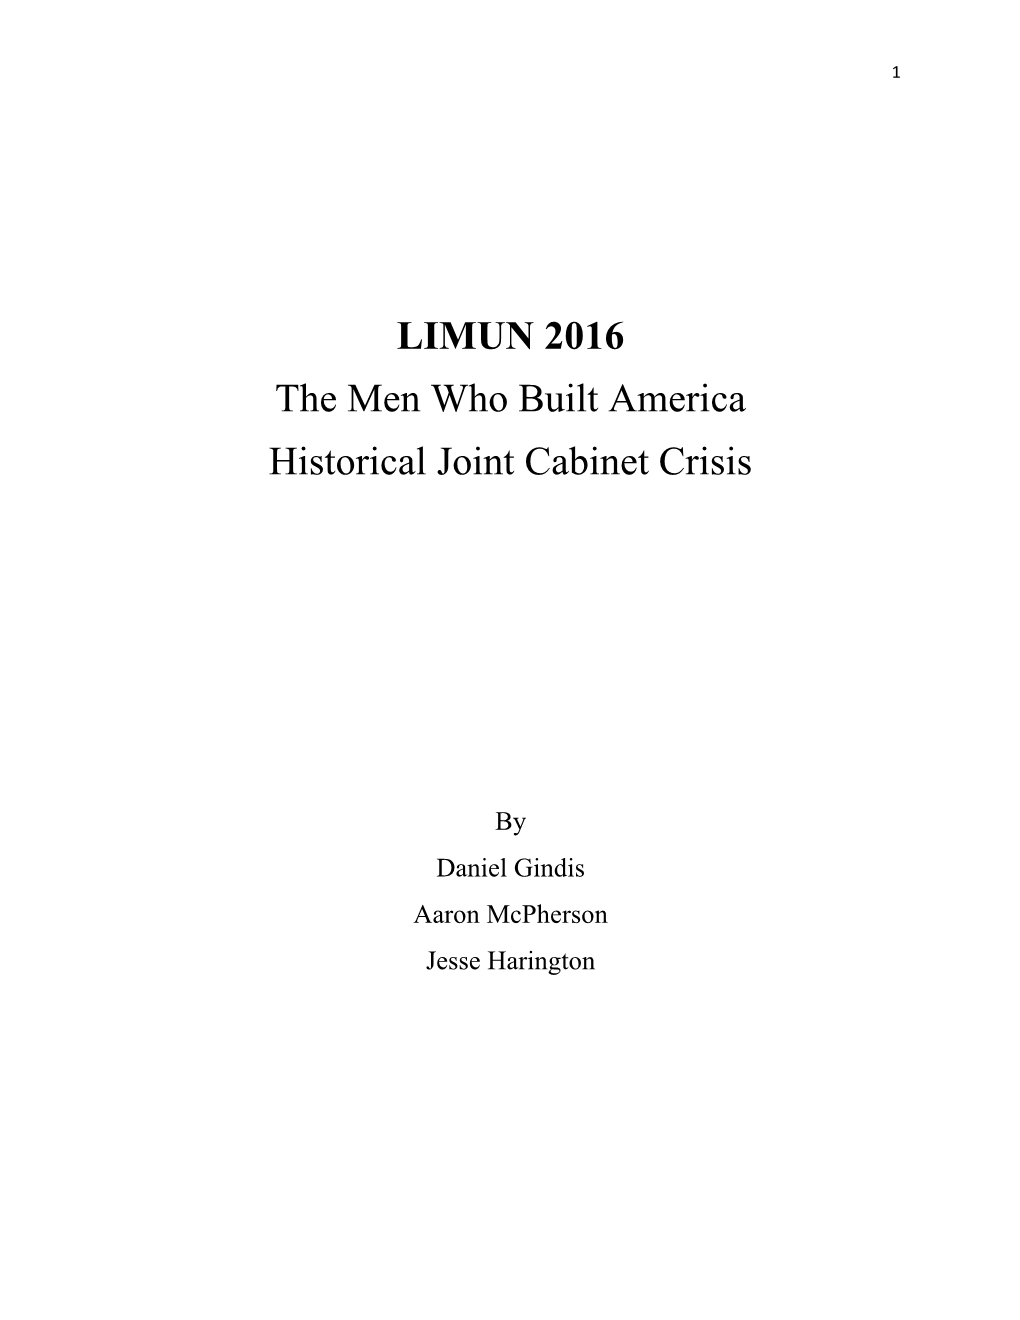 LIMUN 2016 the Men Who Built America Historical Joint Cabinet Crisis